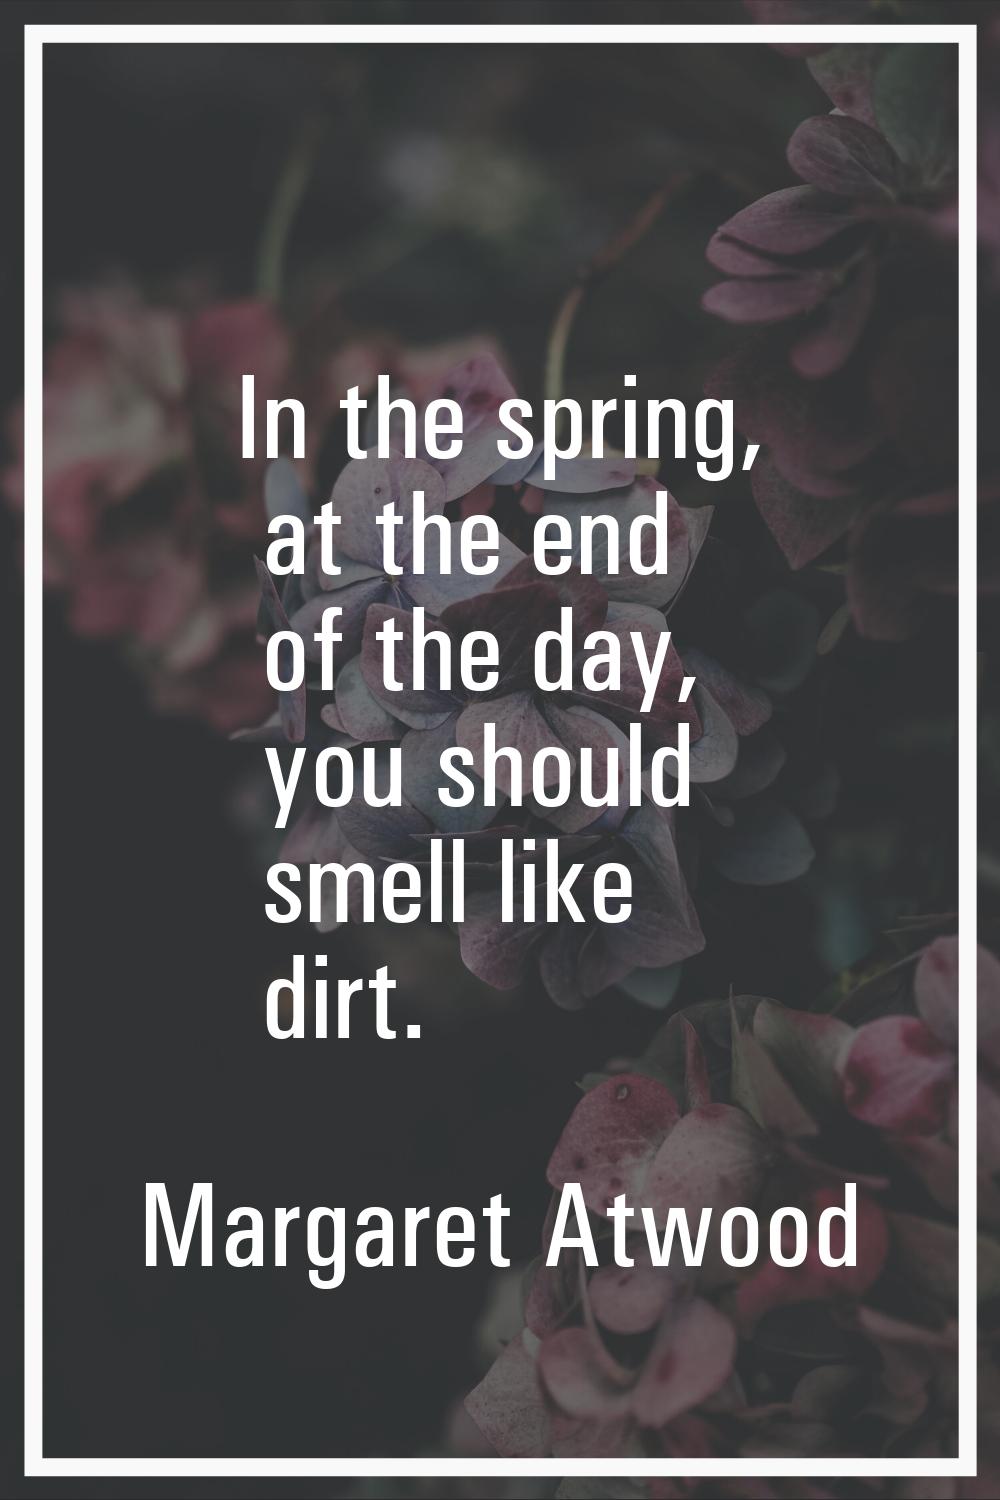 In the spring, at the end of the day, you should smell like dirt.